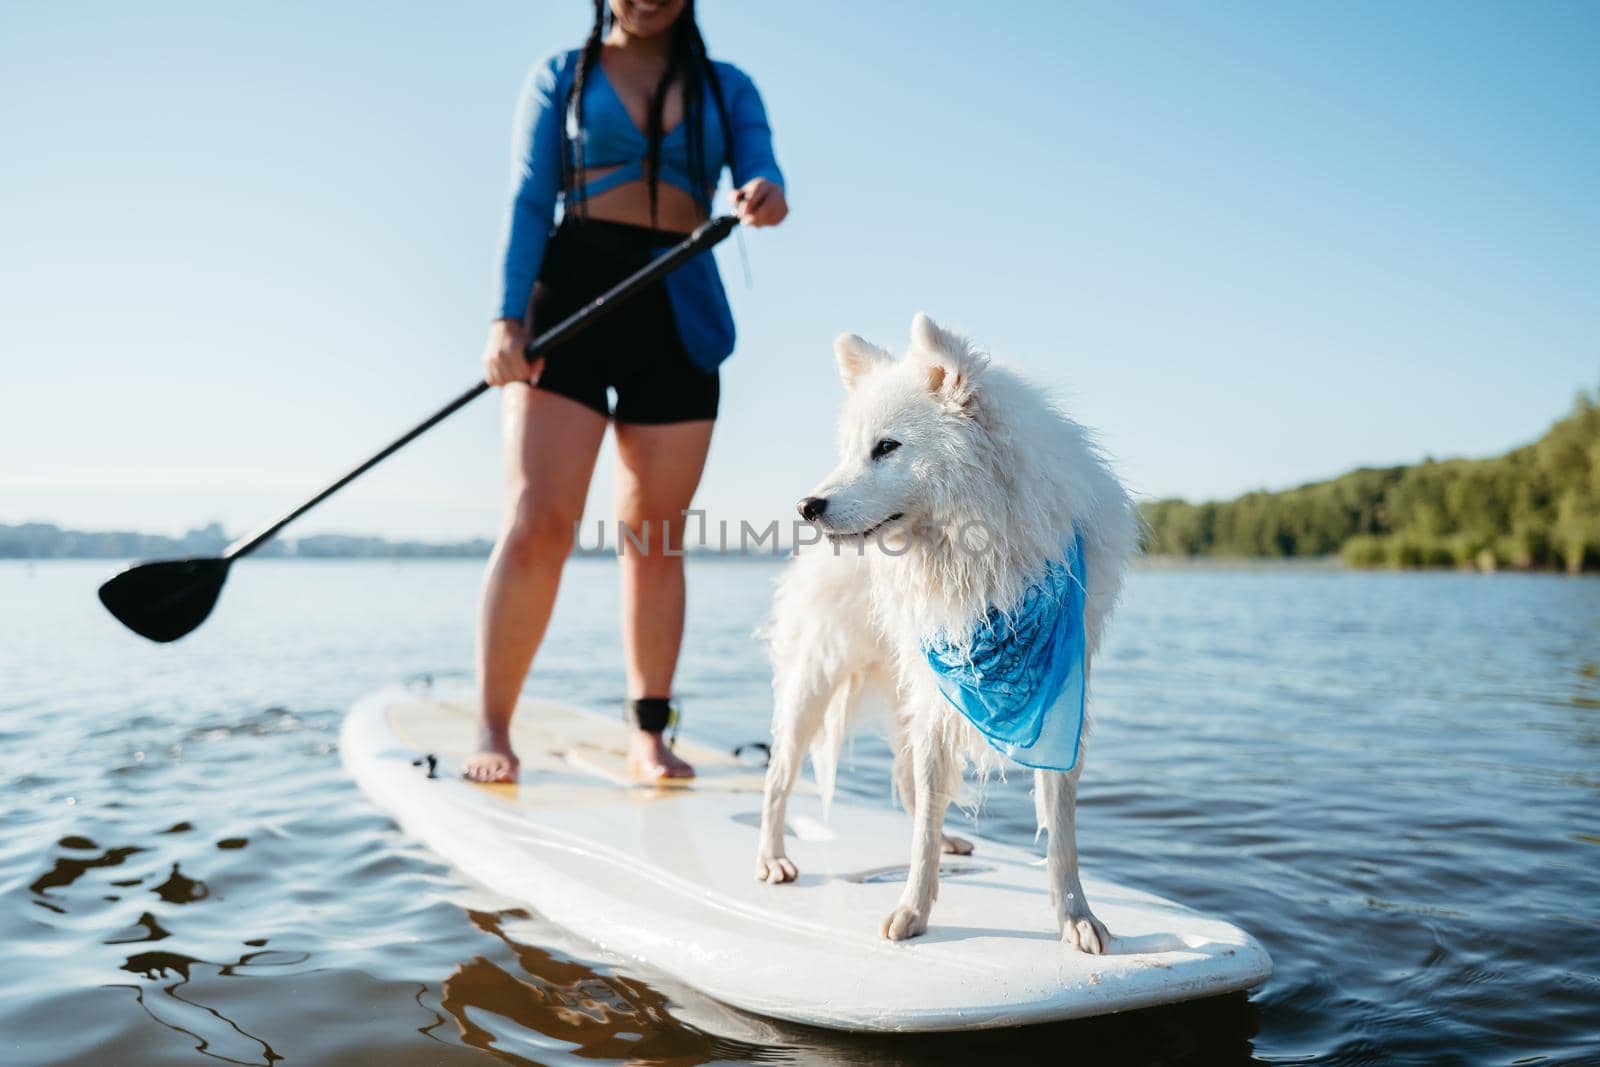 Snow-White Japanese Spitz Dog Standing on Sup Board, Woman Paddleboarding with Her Pet on the City Lake Early Morning by Romvy